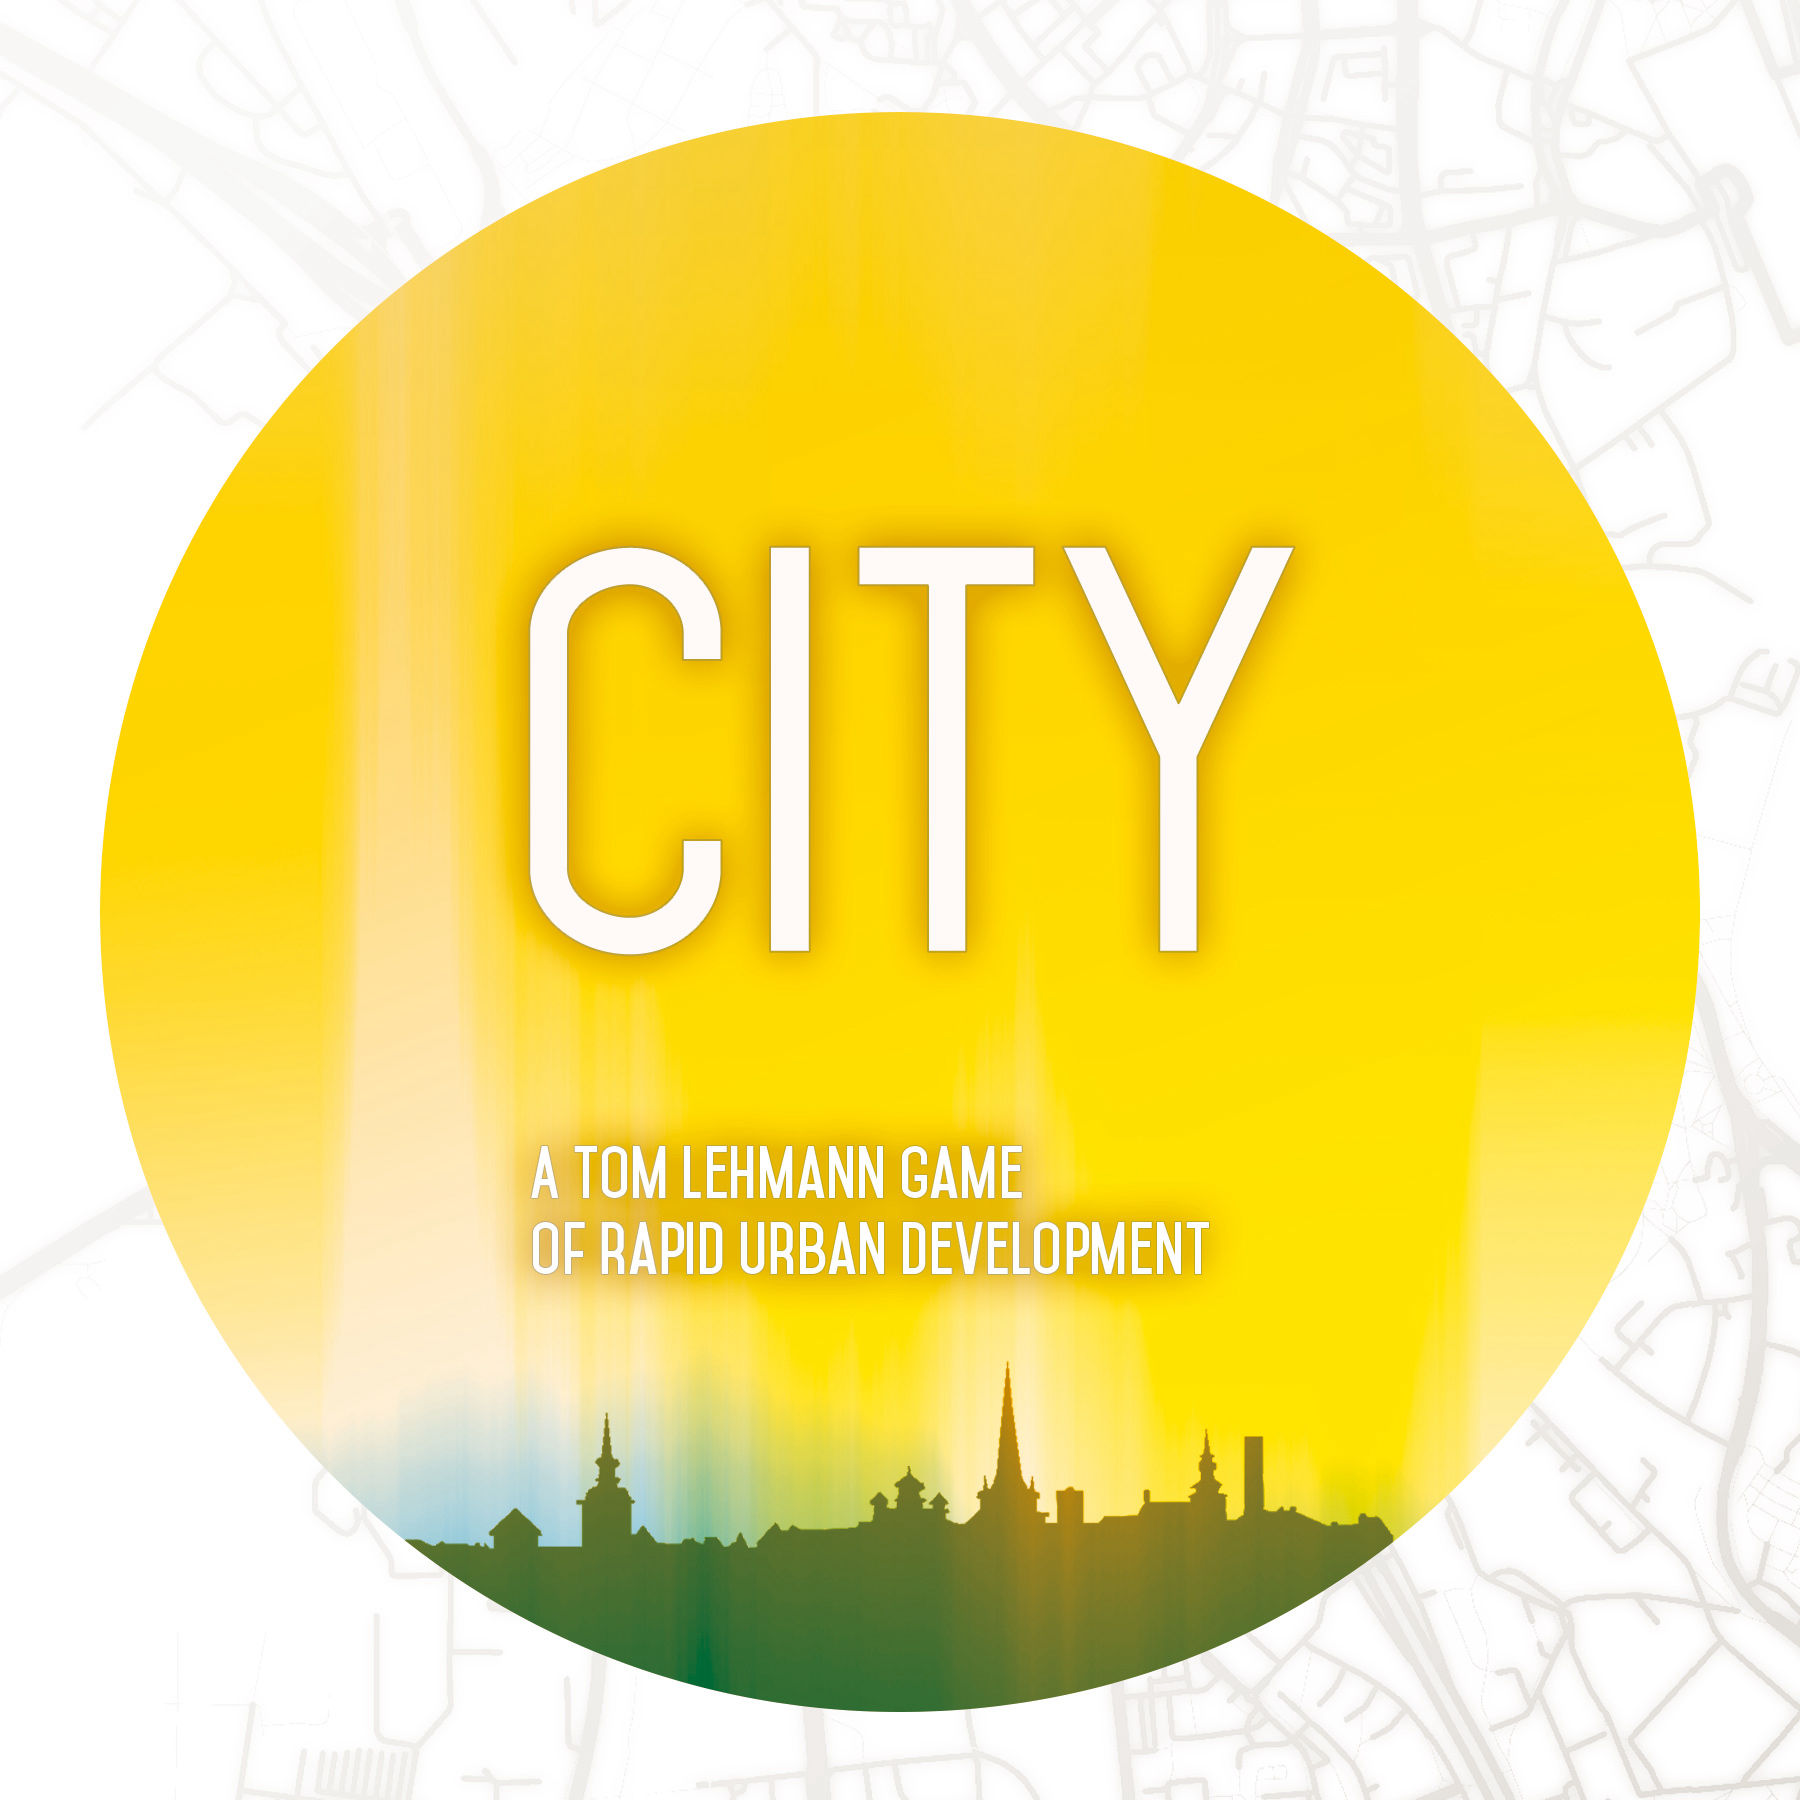 Language-independent design for The City by Tom Lehmann